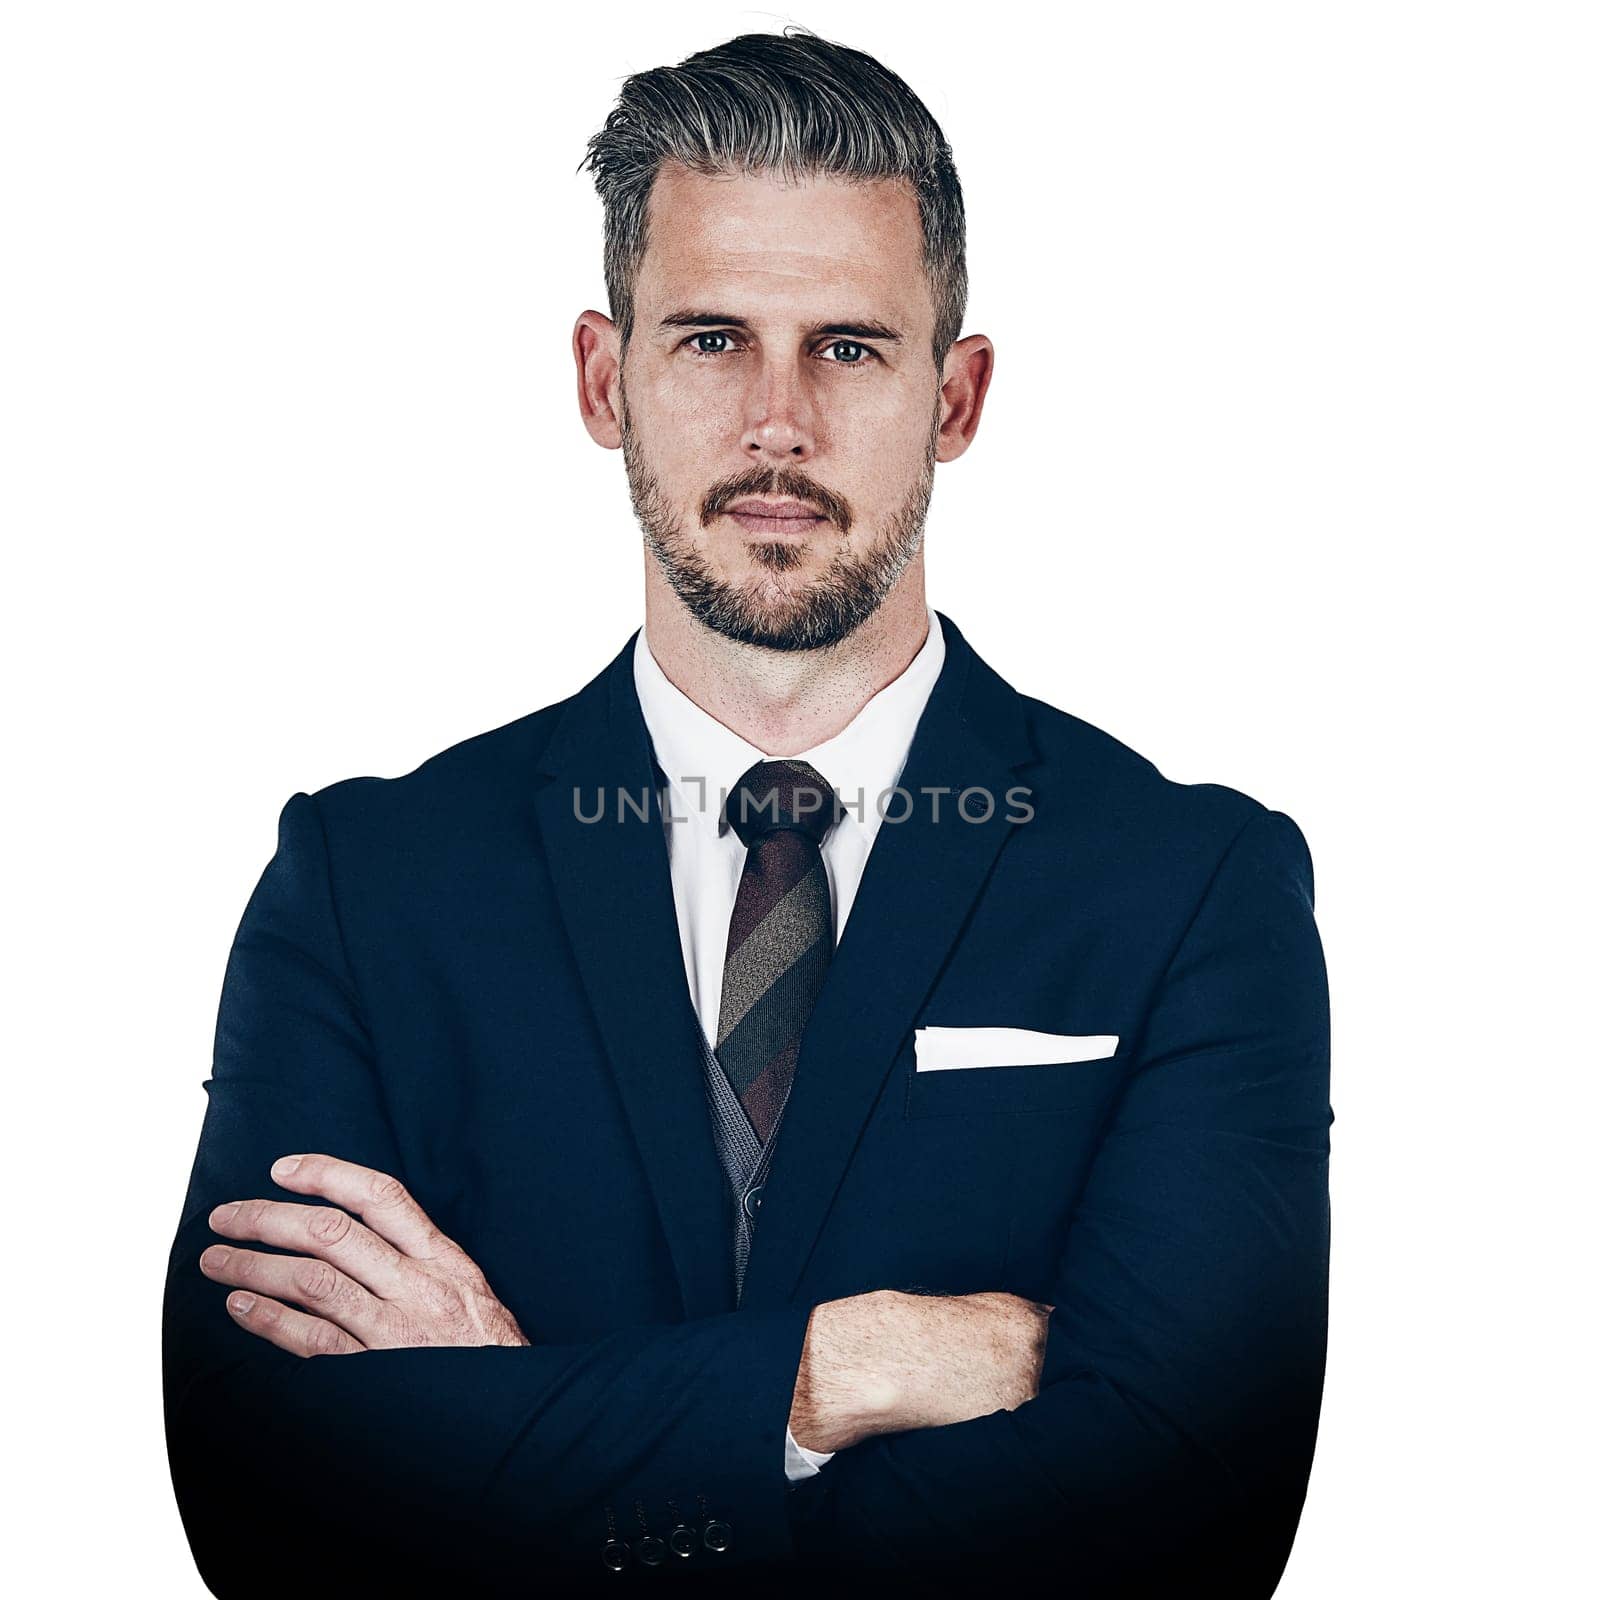 Driven and determined to succeed. Studio portrait of a confident businessman posing against a white background